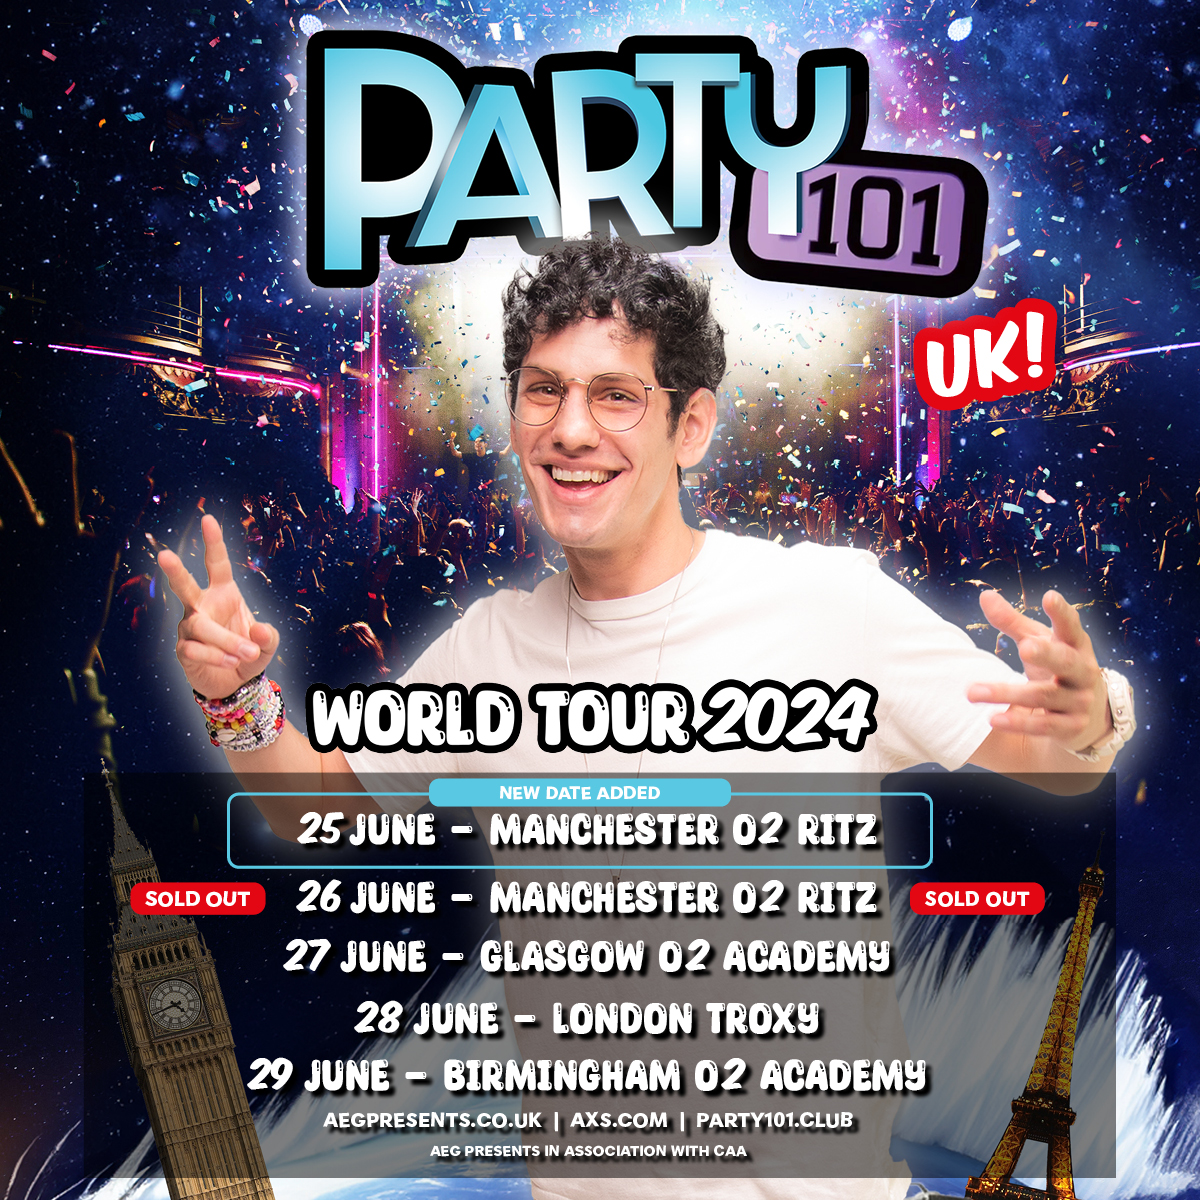 NEW DATE ADDED: Due to demand, Party101 with DJ @MattBennett just added an extra date on June 25th at O2 Ritz Manchester.

Tickets on sale now: aegp.uk/party101uk